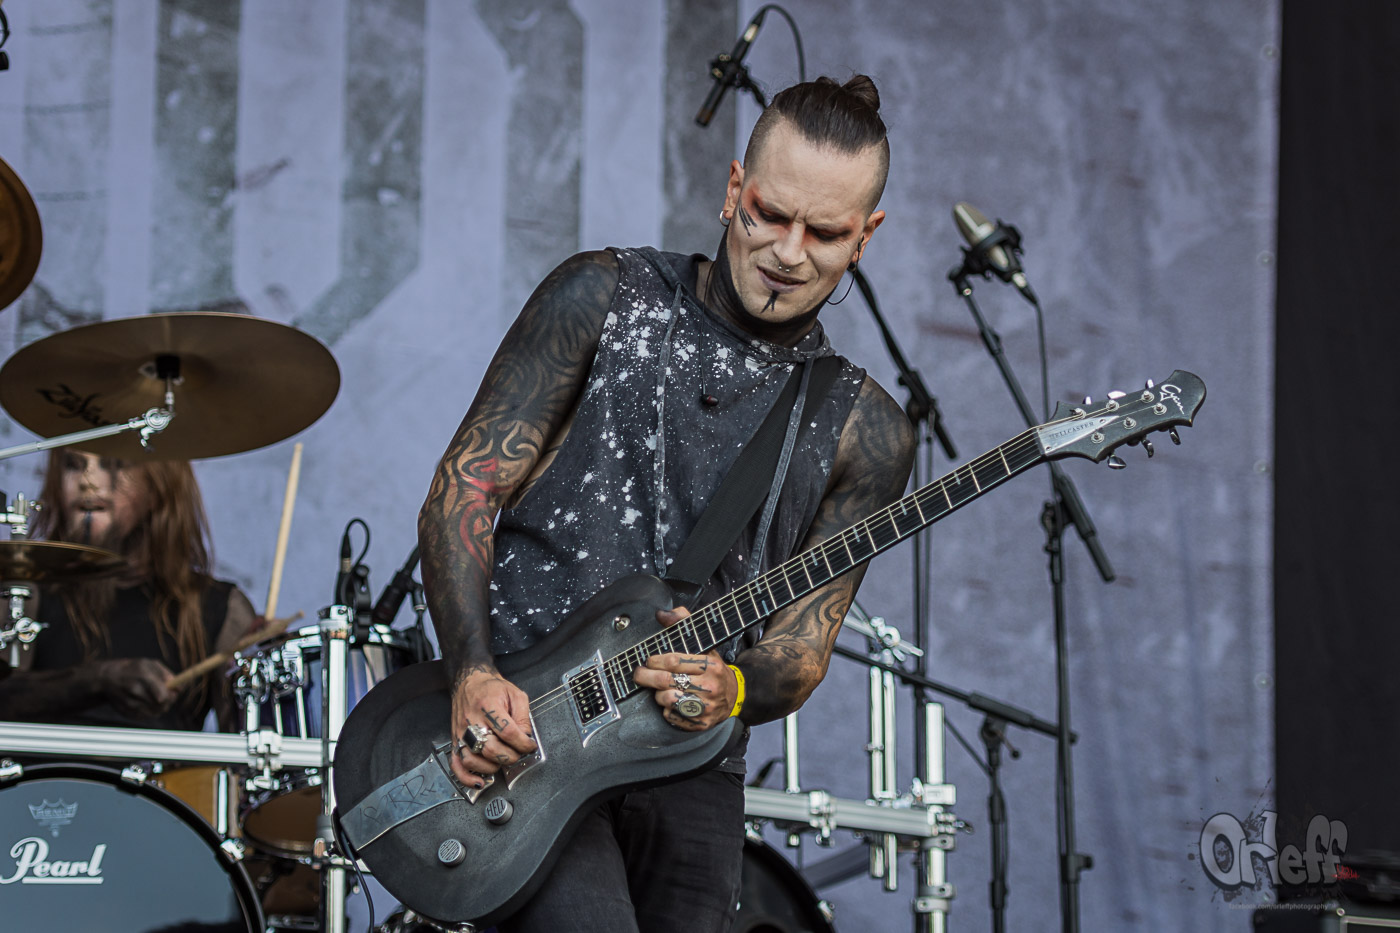 Lord Of The Lost @ Hills Of Rock, 2019